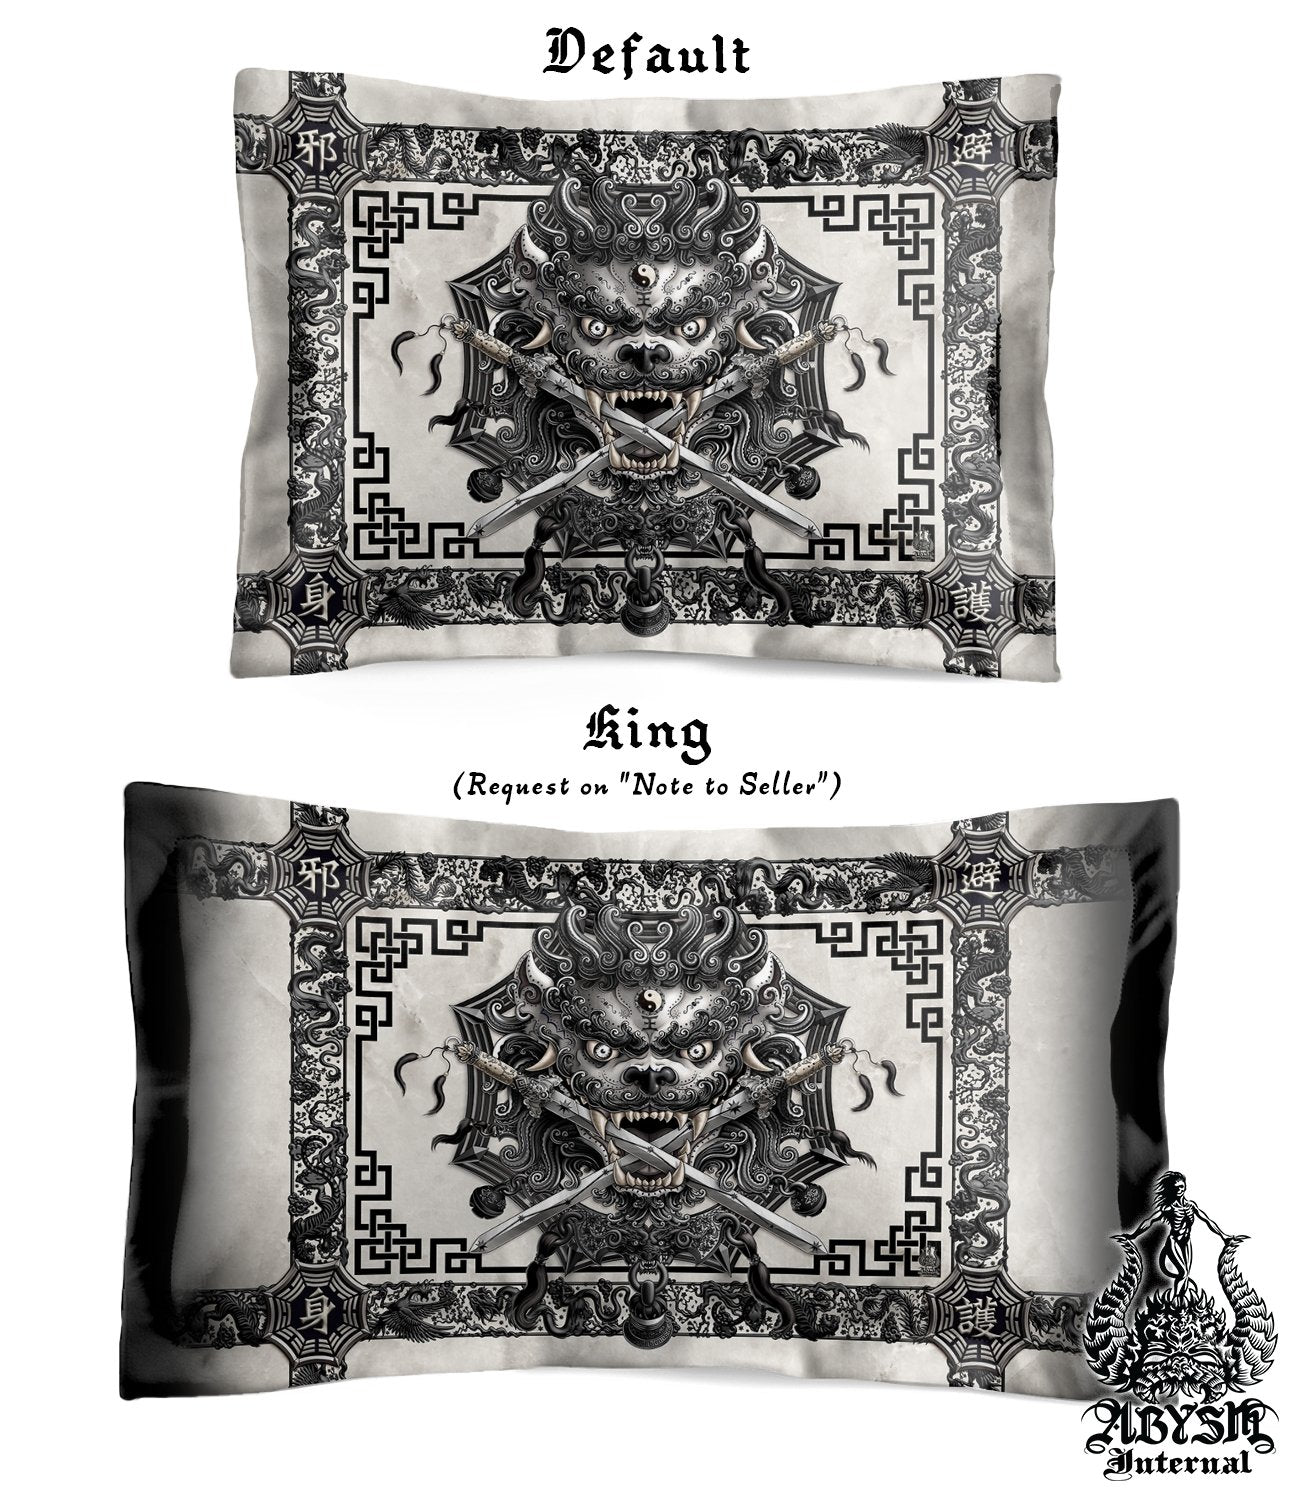 Asian Lion Bedding Set, Comforter and Duvet, Taiwan Sword Lion, Chinese Bed Cover, Gamer Bedroom, Alternative Decor, King, Queen and Twin Size - Black & White Goth - Abysm Internal